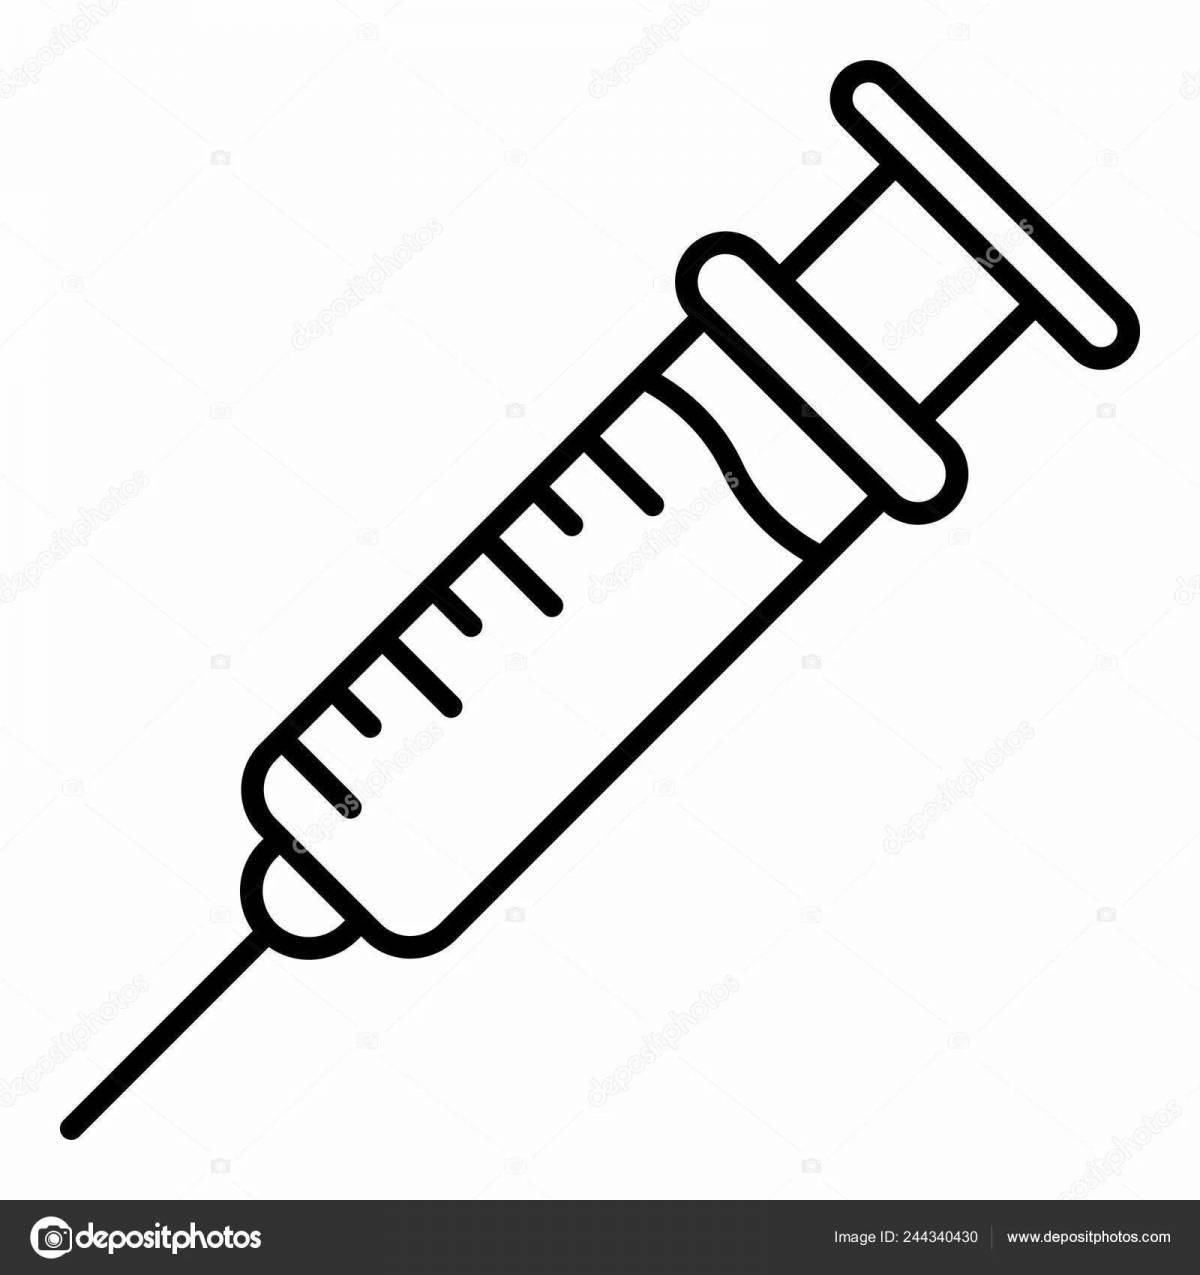 Coloring animated syringe with a needle